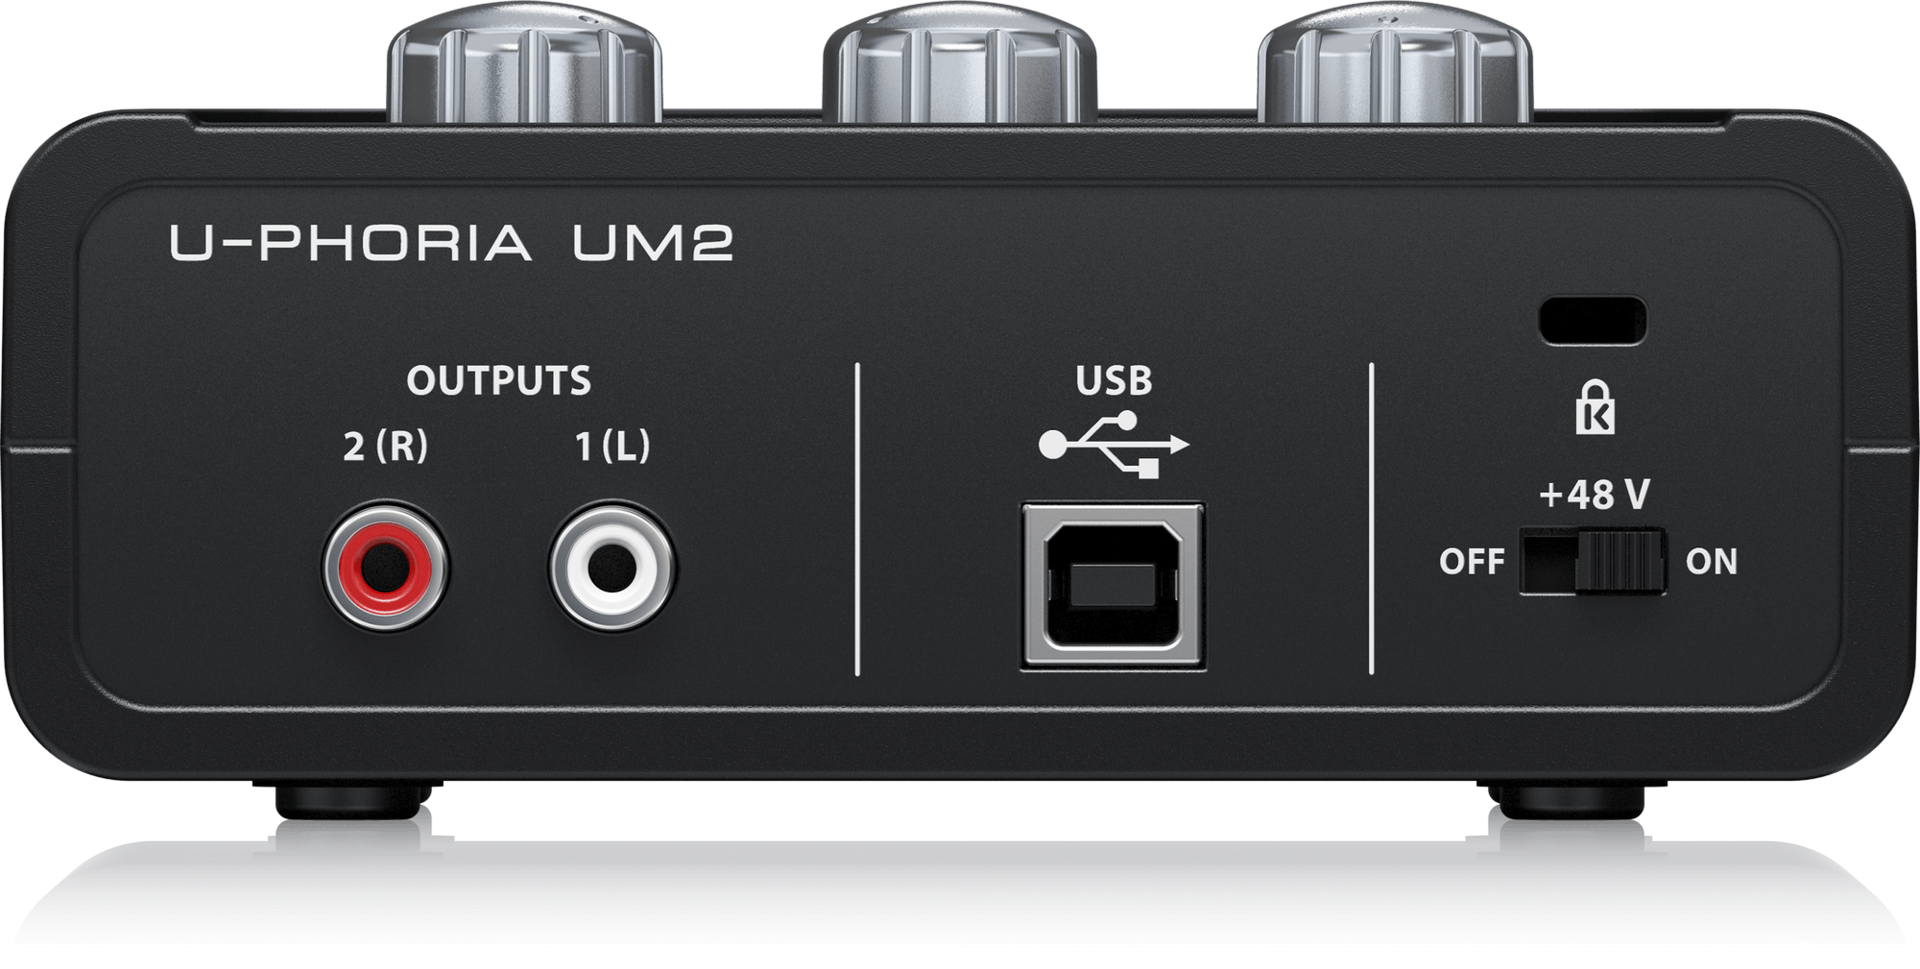 Behringer UM2 Audiophile 2x2 USB Audio Interface with XENYX Mic Preamplifier